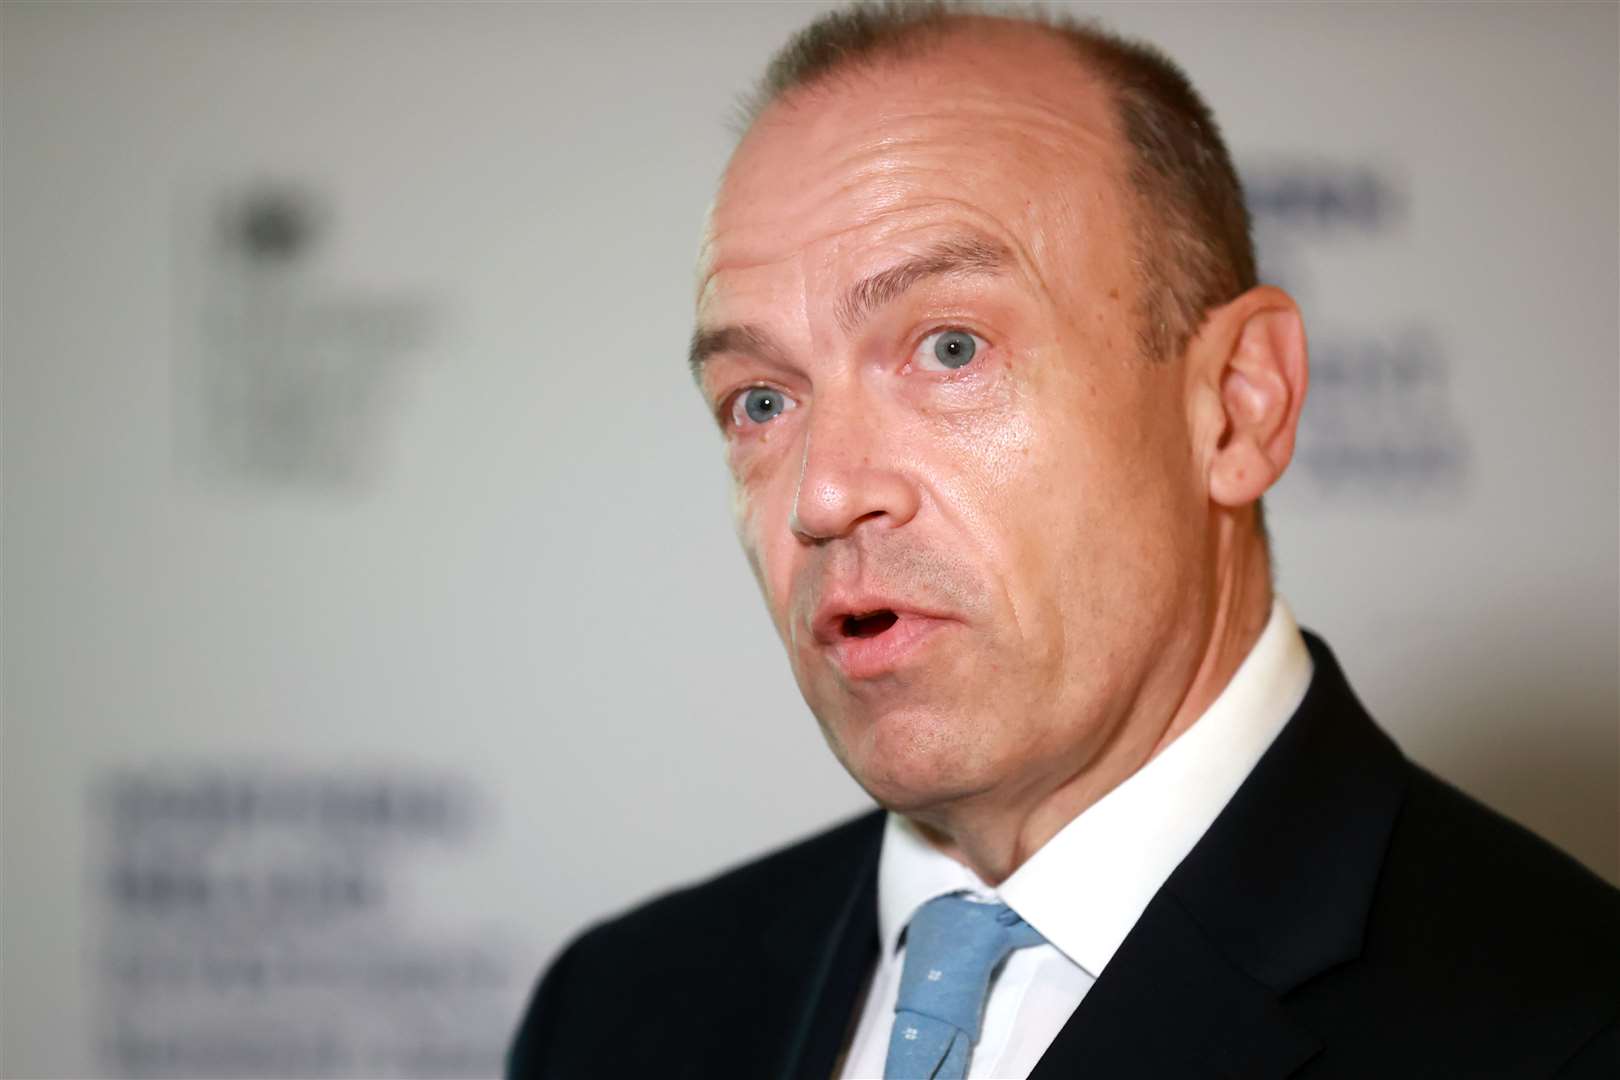 Northern Ireland Secretary Chris Heaton-Harris insists progress is being made in negotiations with the DUP (Liam McBurney/PA)